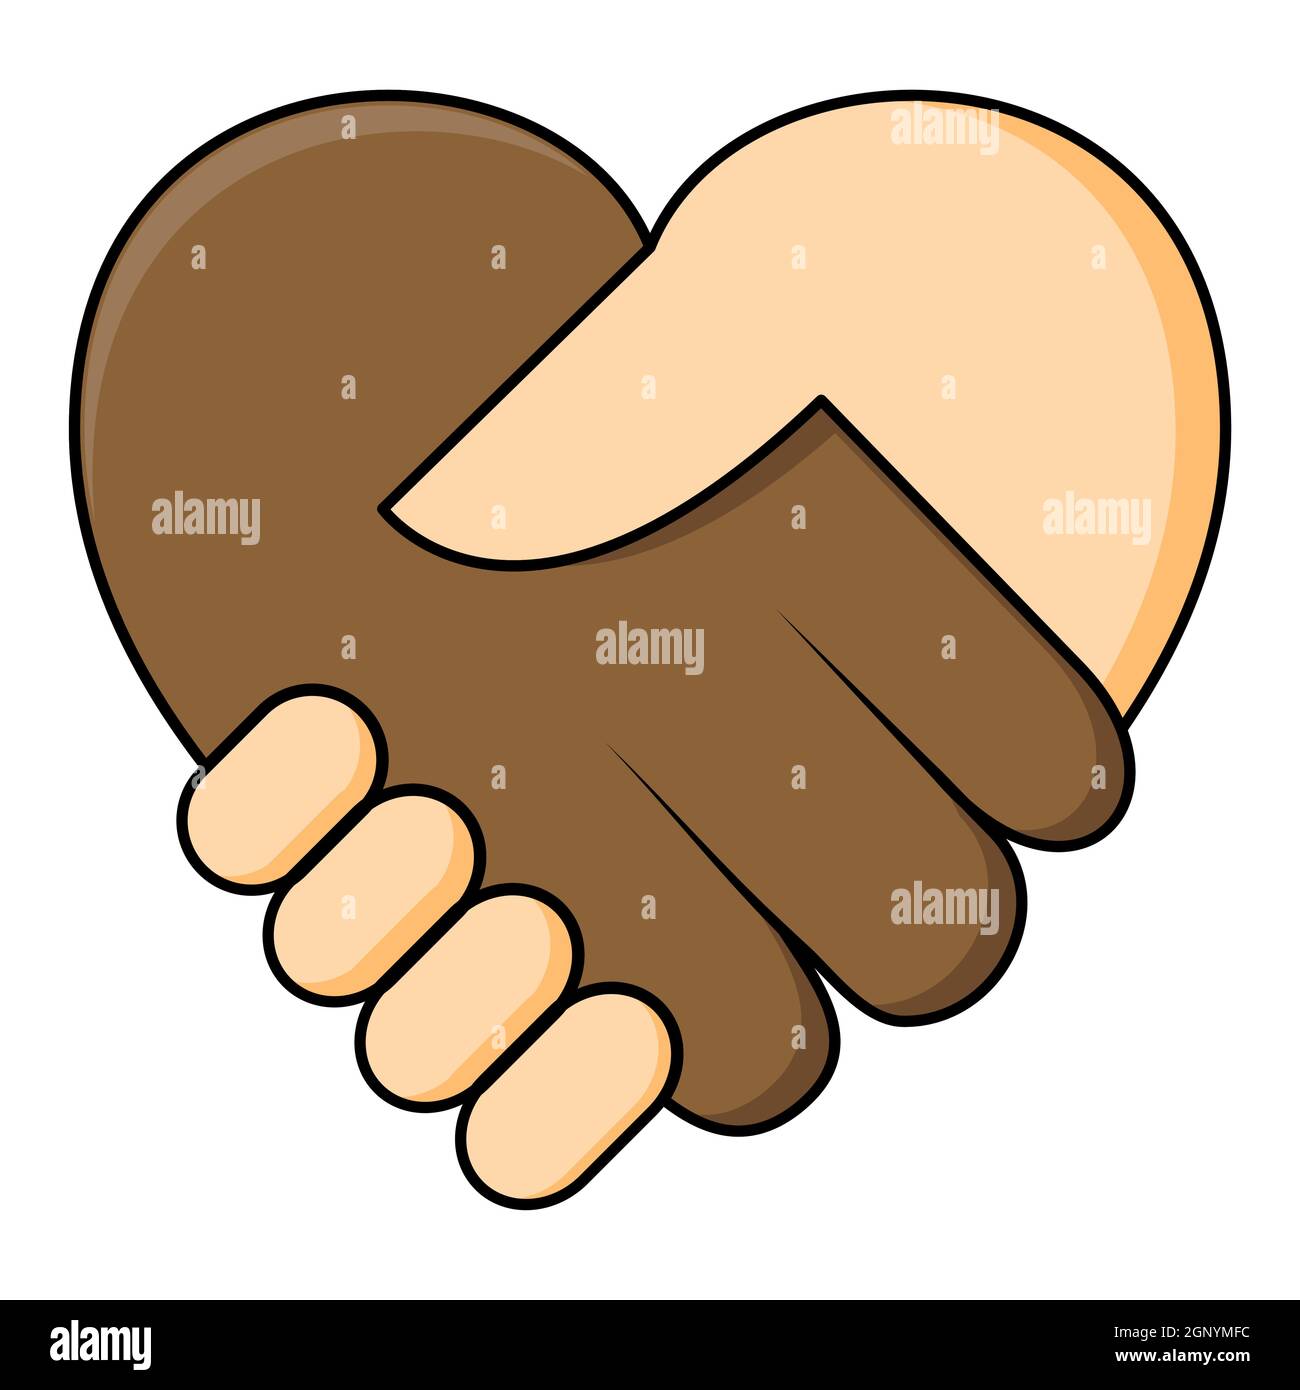 No racism - shake hand in heart shape. Two hands dark and fair skin in a handshake. Equality of races concept icon. Great also for symbol of agreement or contract between different ethnicity. Stock Vector